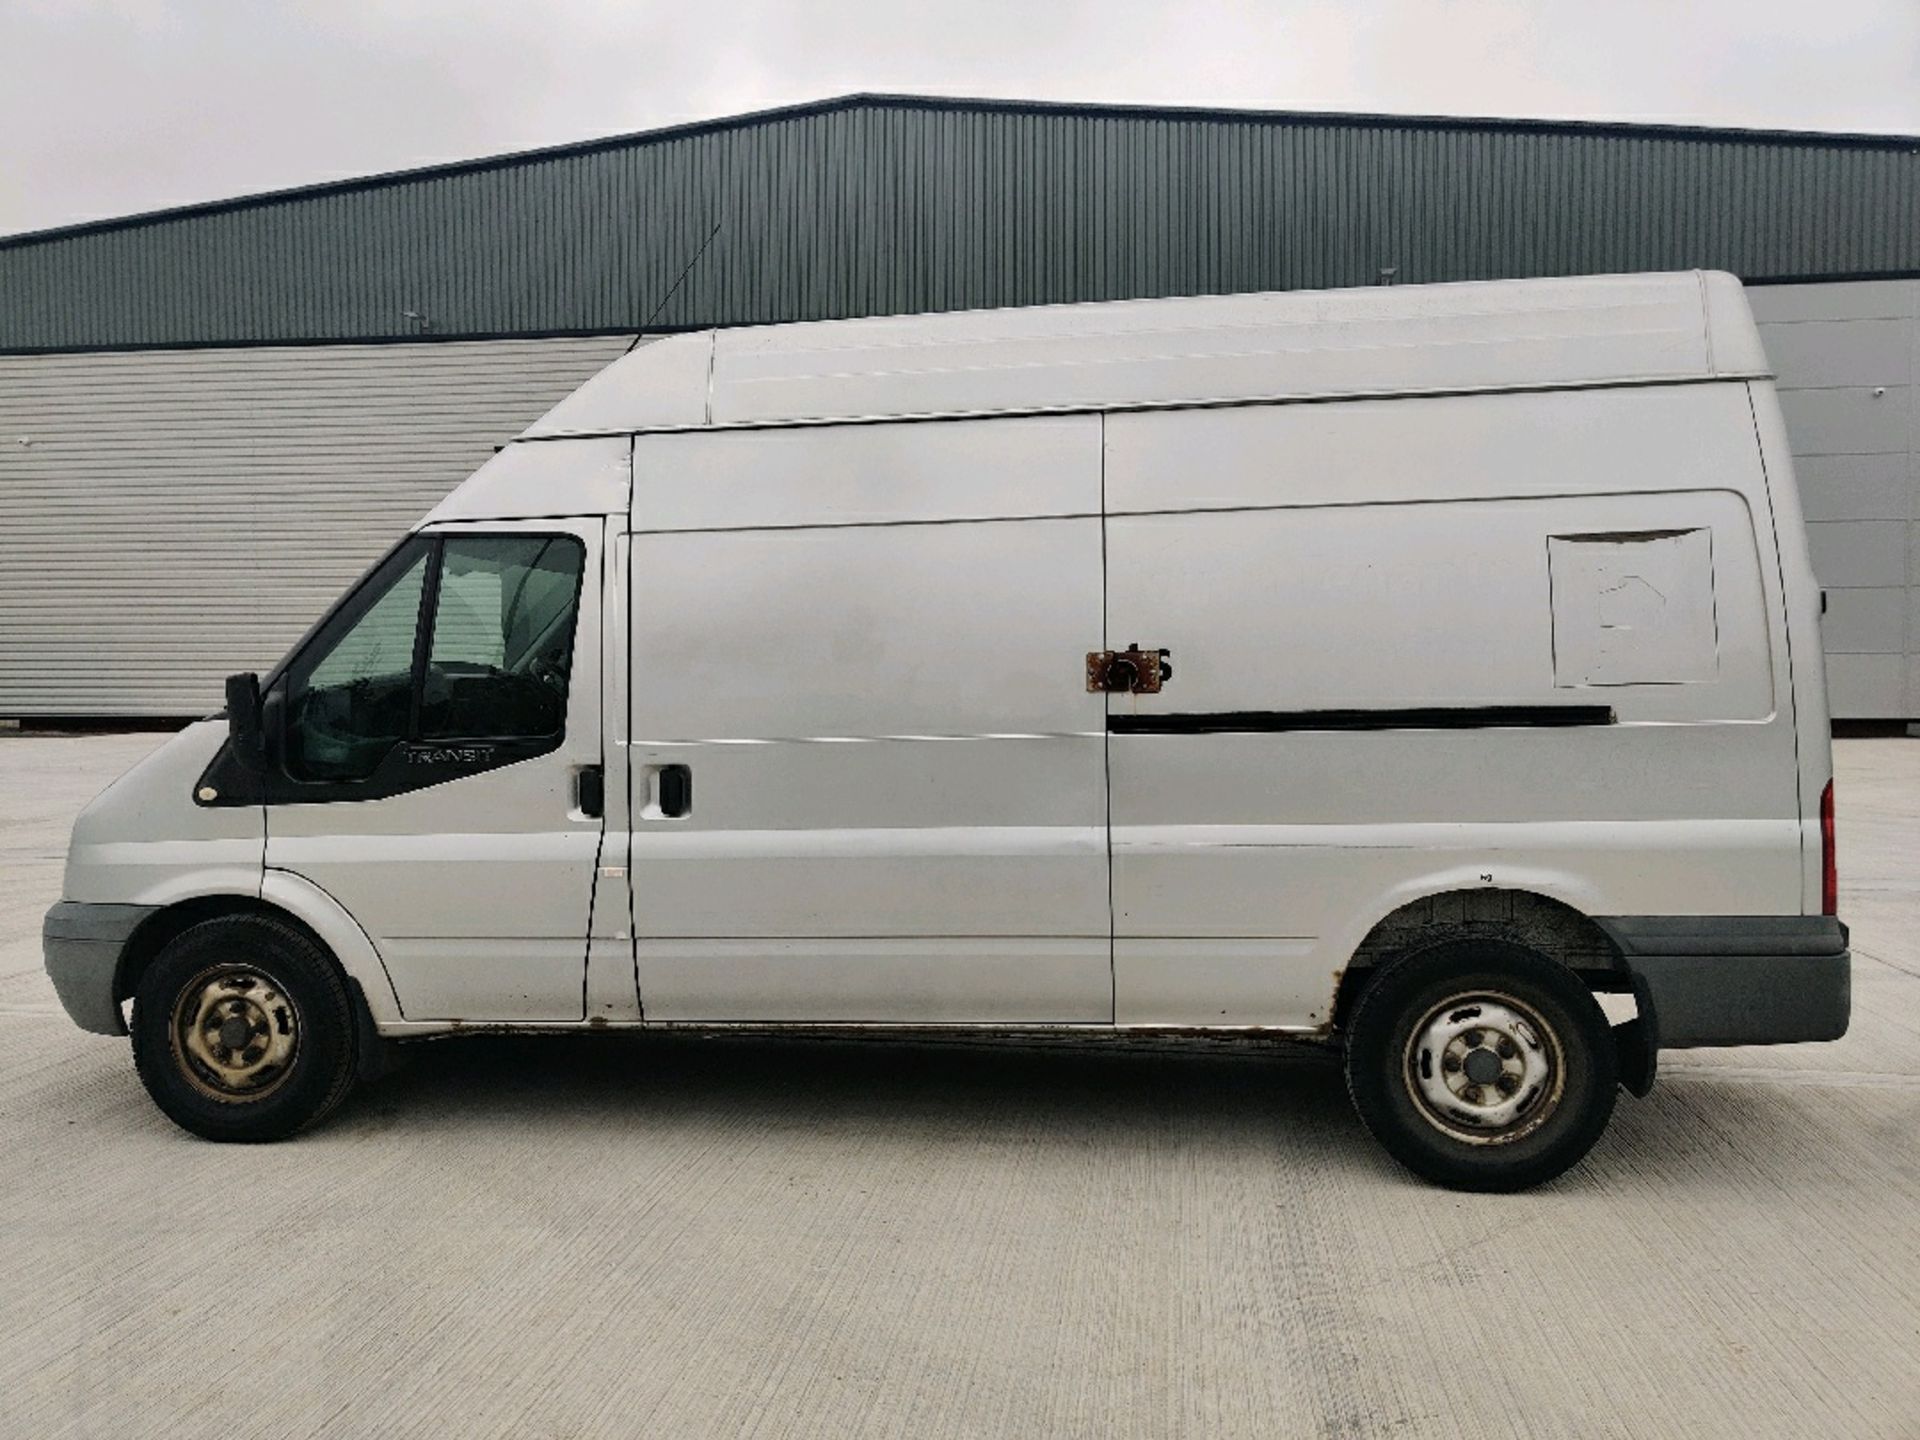 ENTRY DIRECT FROM LOCAL AUTHORITY Ford transit YG59OYU - Image 2 of 26